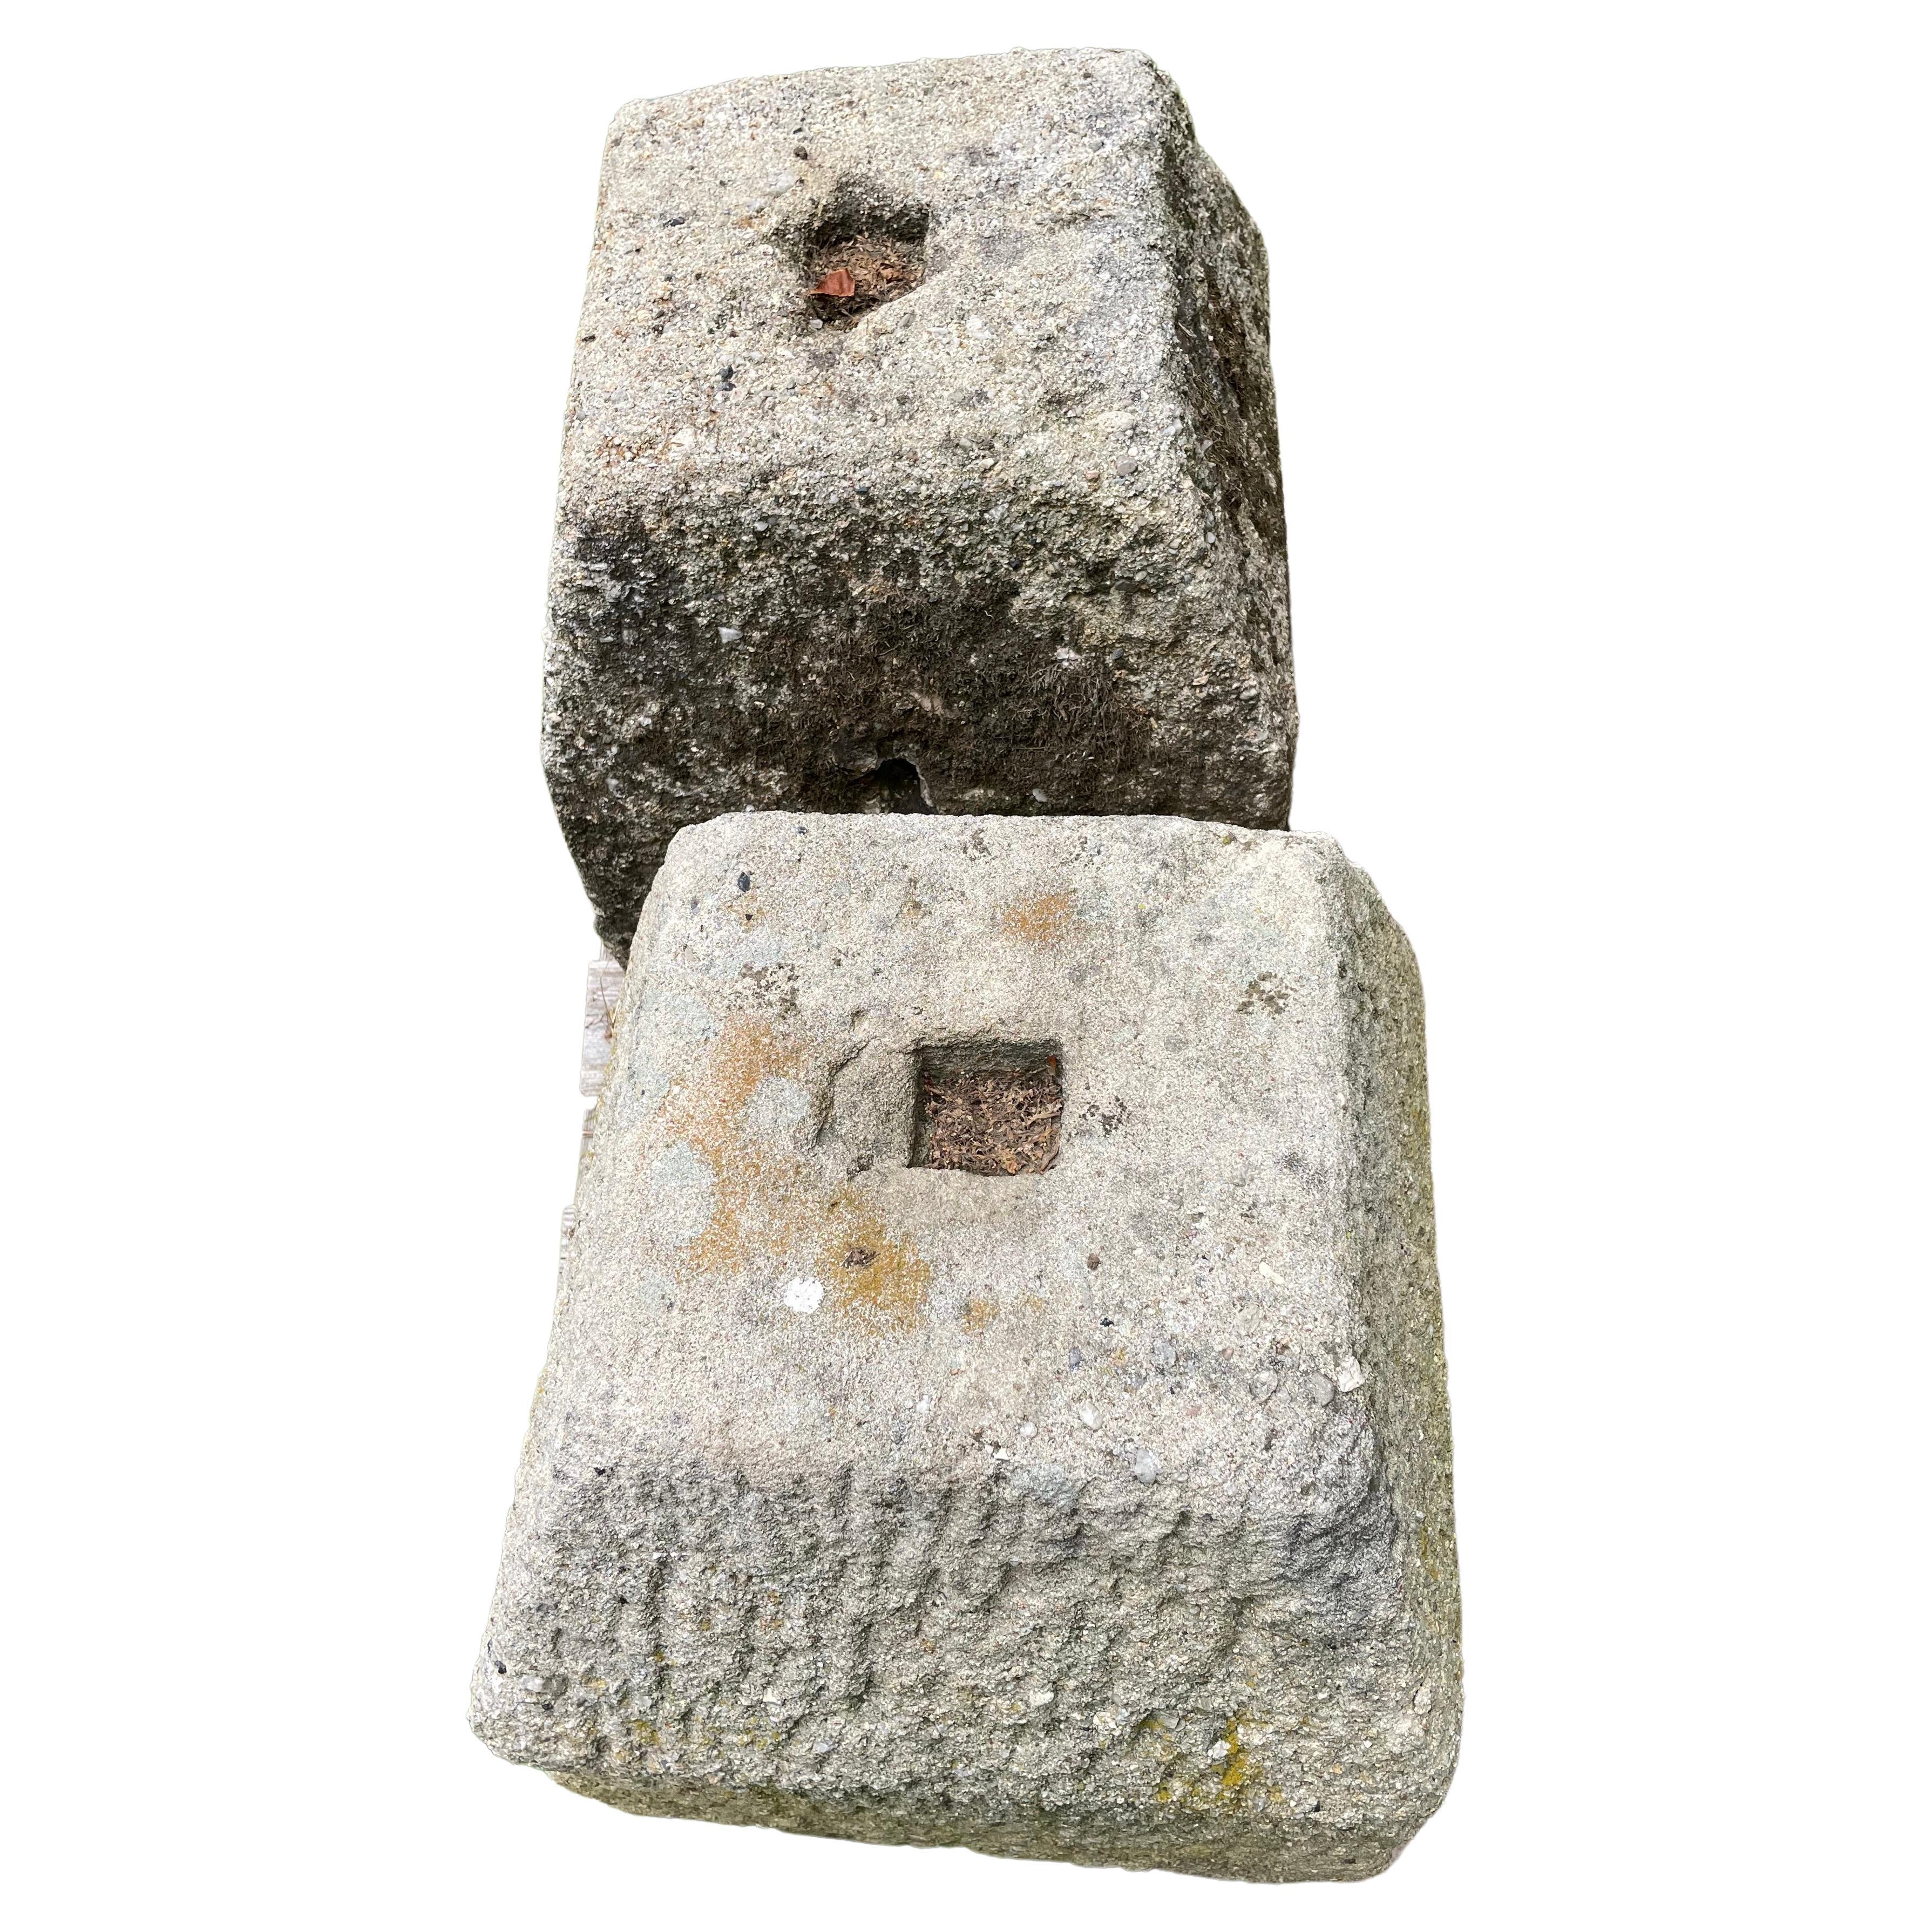 These hand-hewn stone plinths likely were original foundation stones and bear a resemblance to staddlestone bases, but are shorter and more stout.  Carved from a very hard heavily-fossilized stone, one pair measures 17